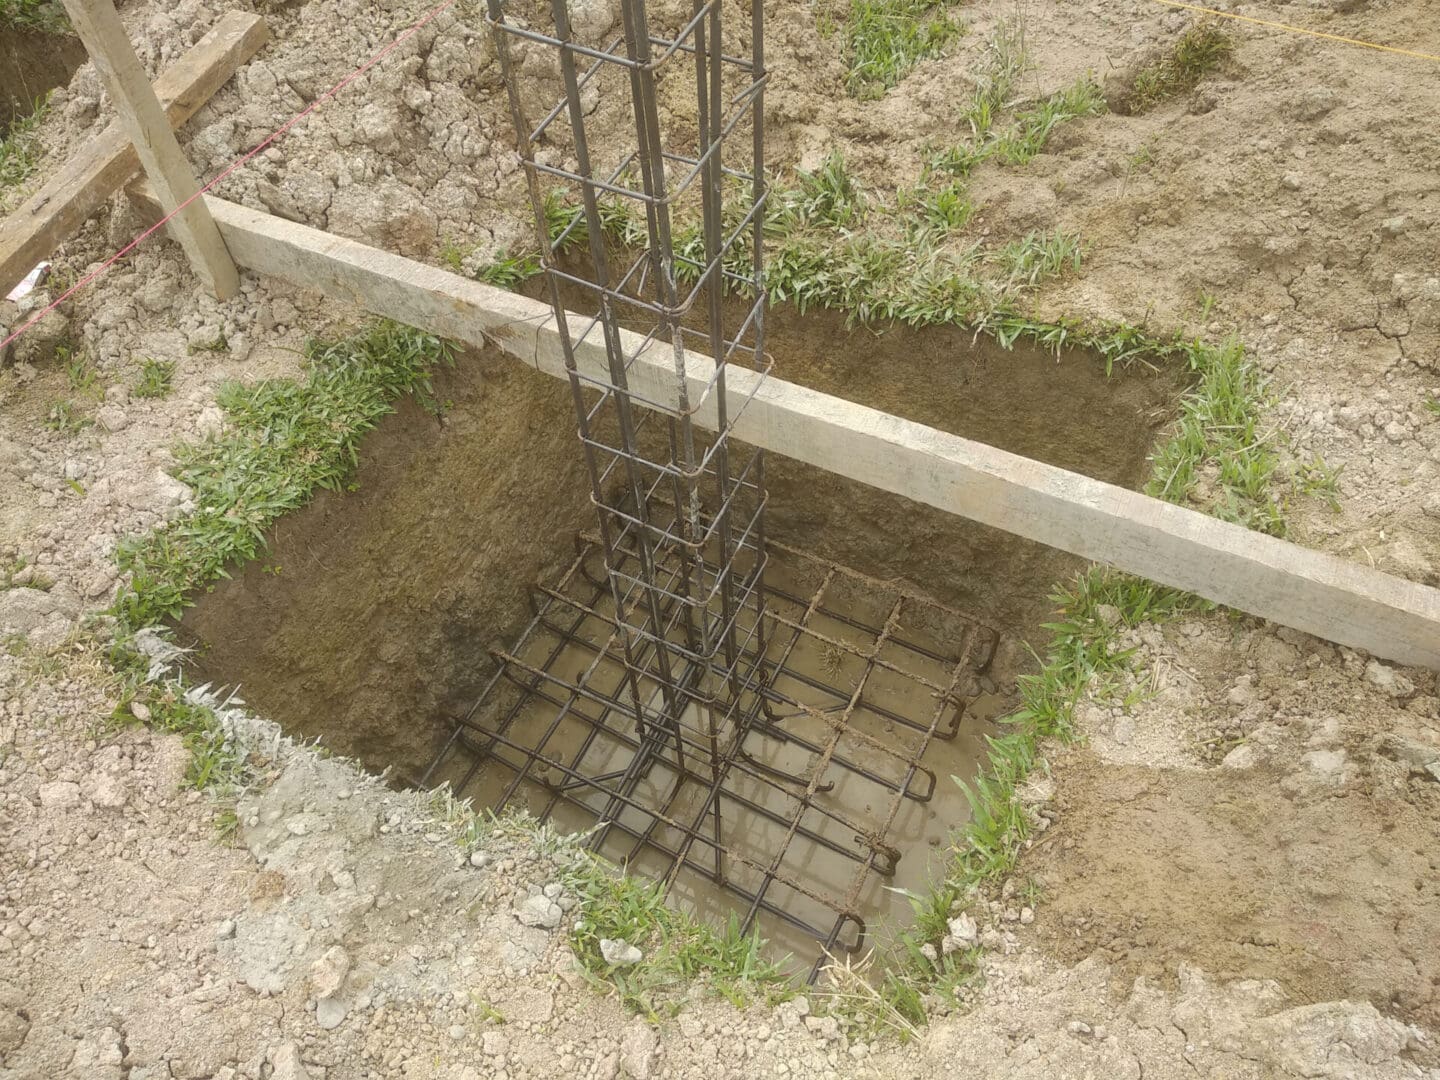 A concrete slab with metal bars in it.